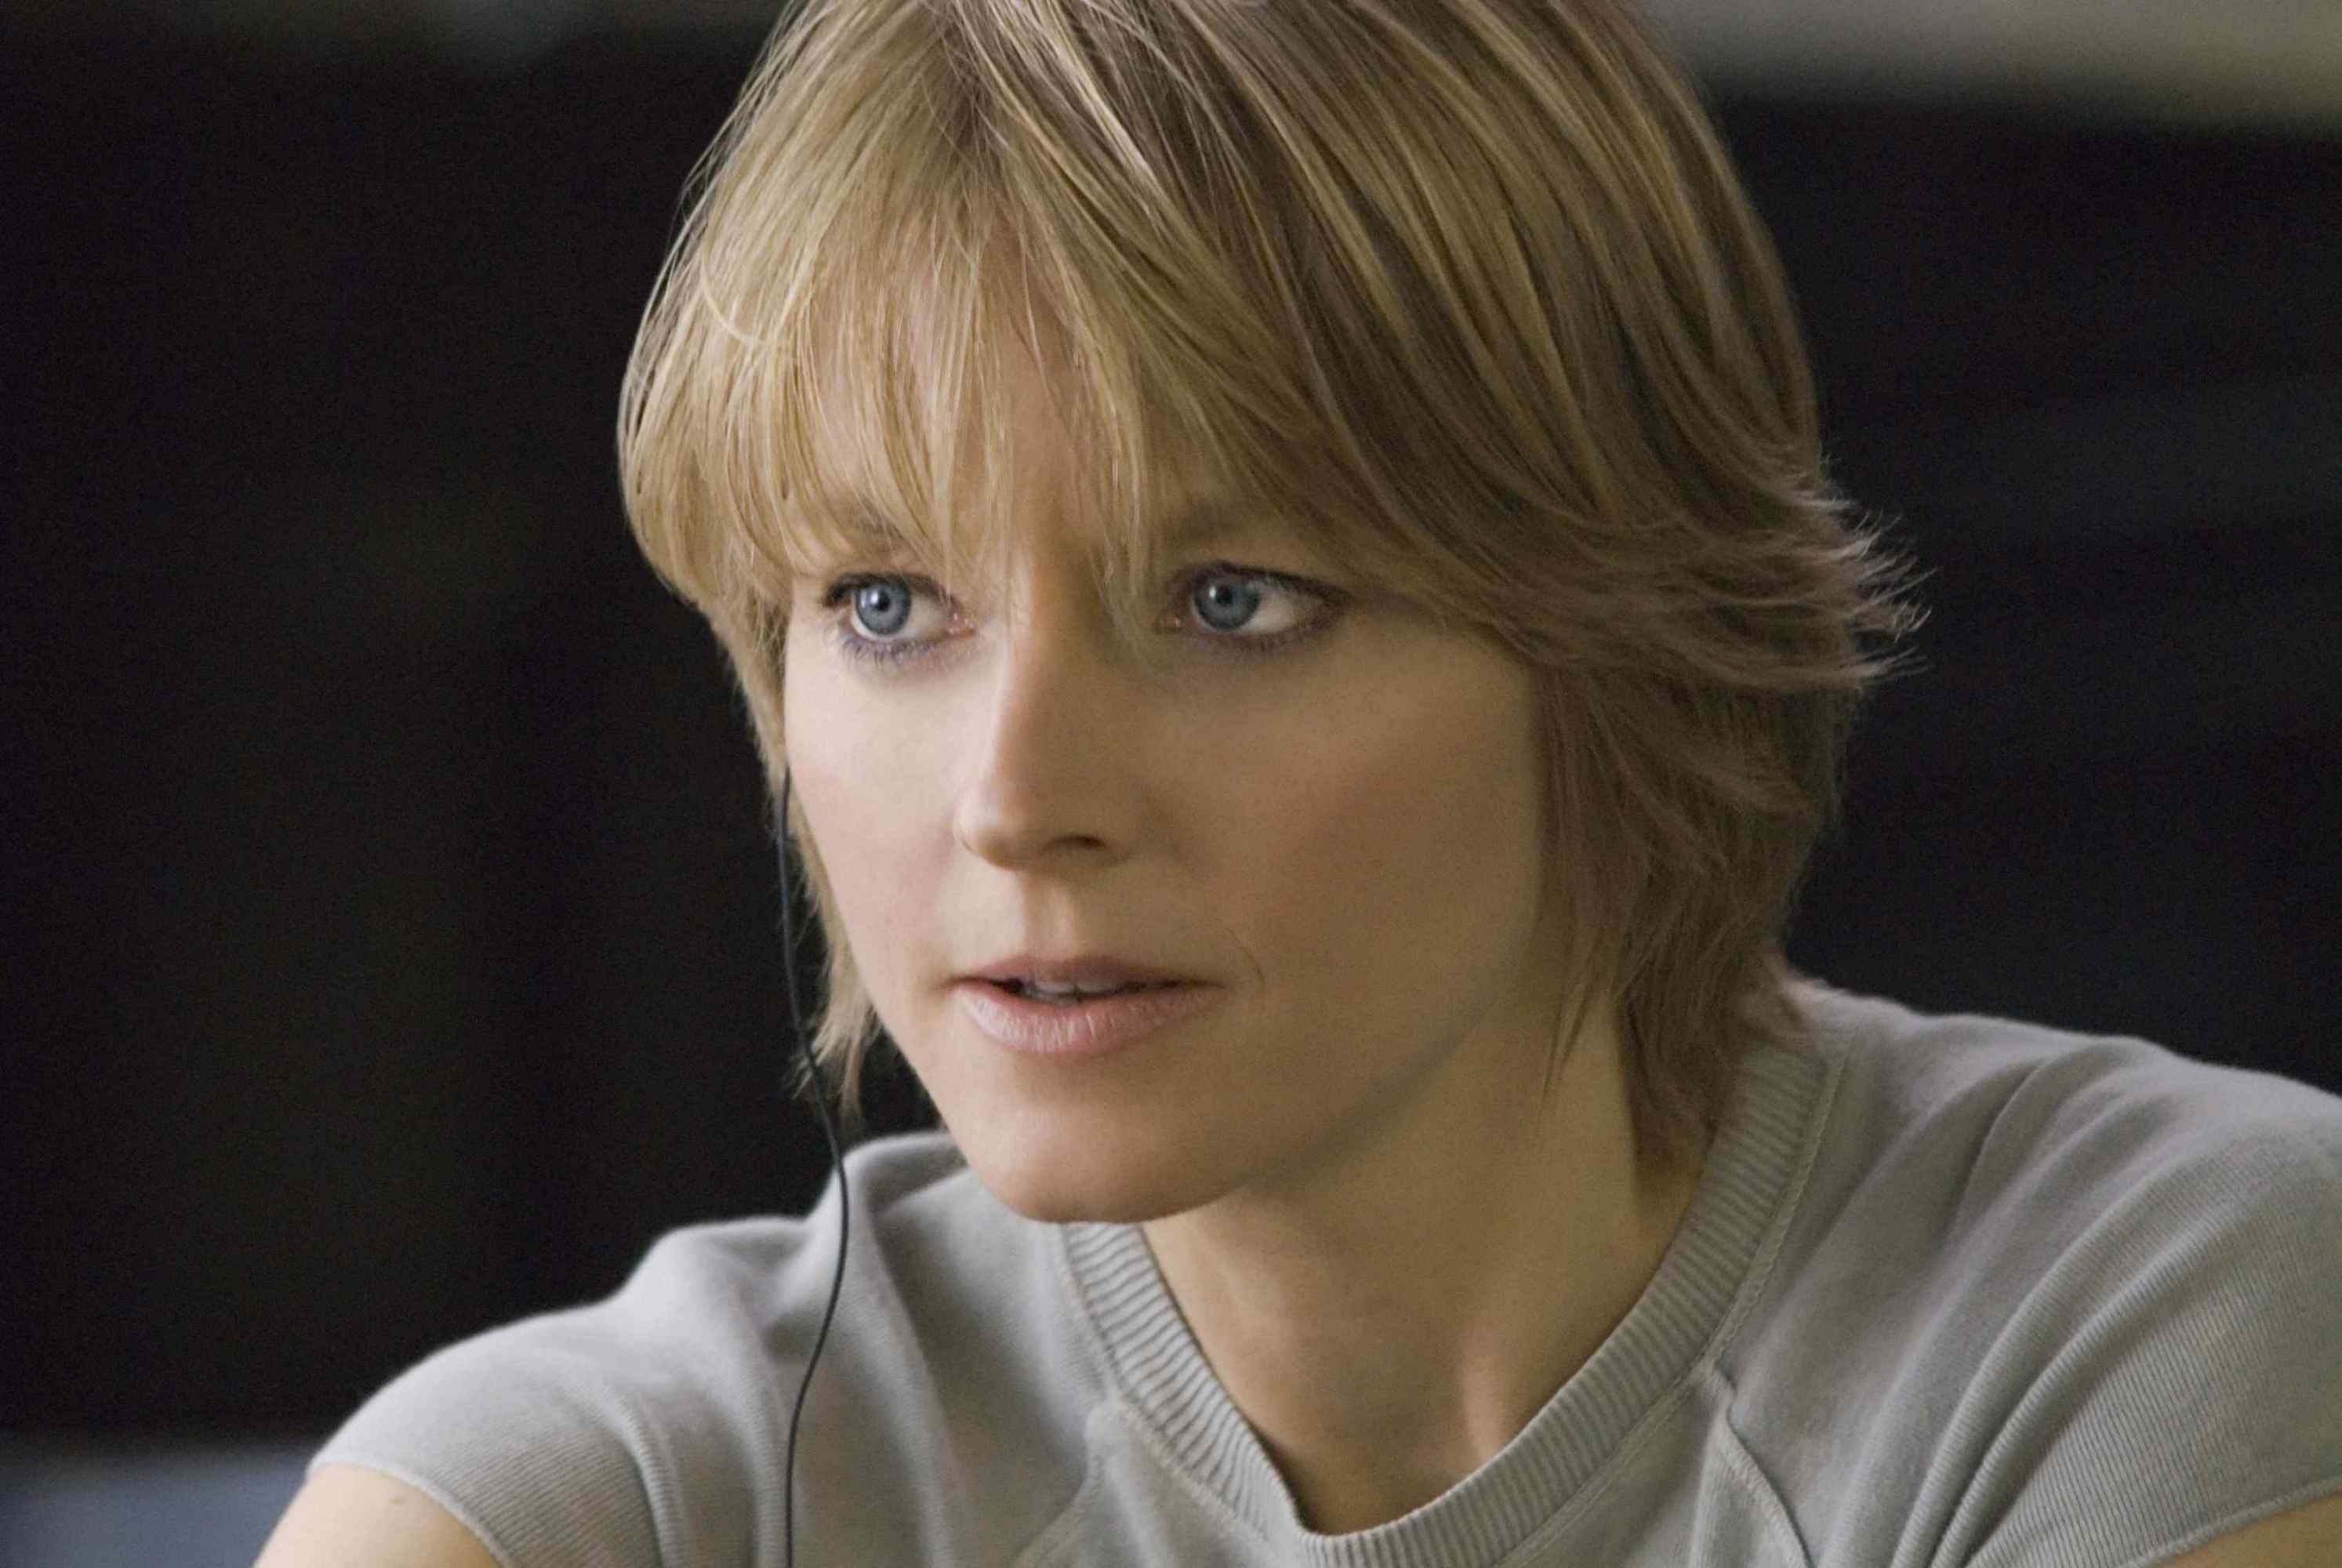 Jodie Foster wallpapers, Images, Photos, Pictures, Striking visuals, 2990x2000 HD Desktop